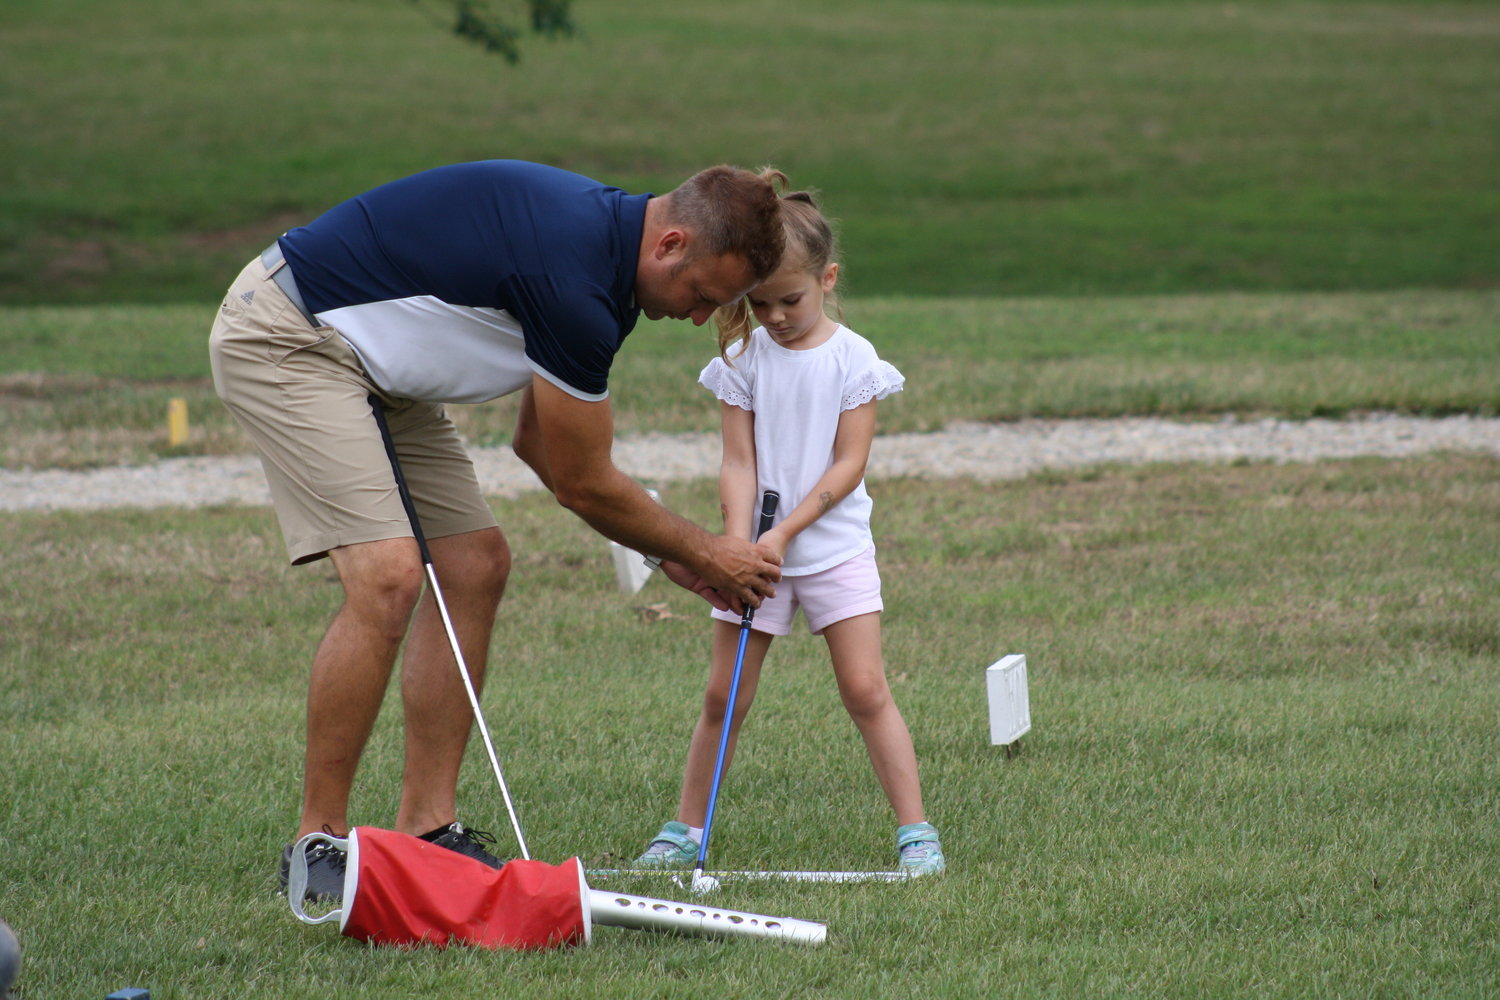 John Knipfel gives instructions during his junior golf camp Thursday at The Oaks golf course in Mexico.